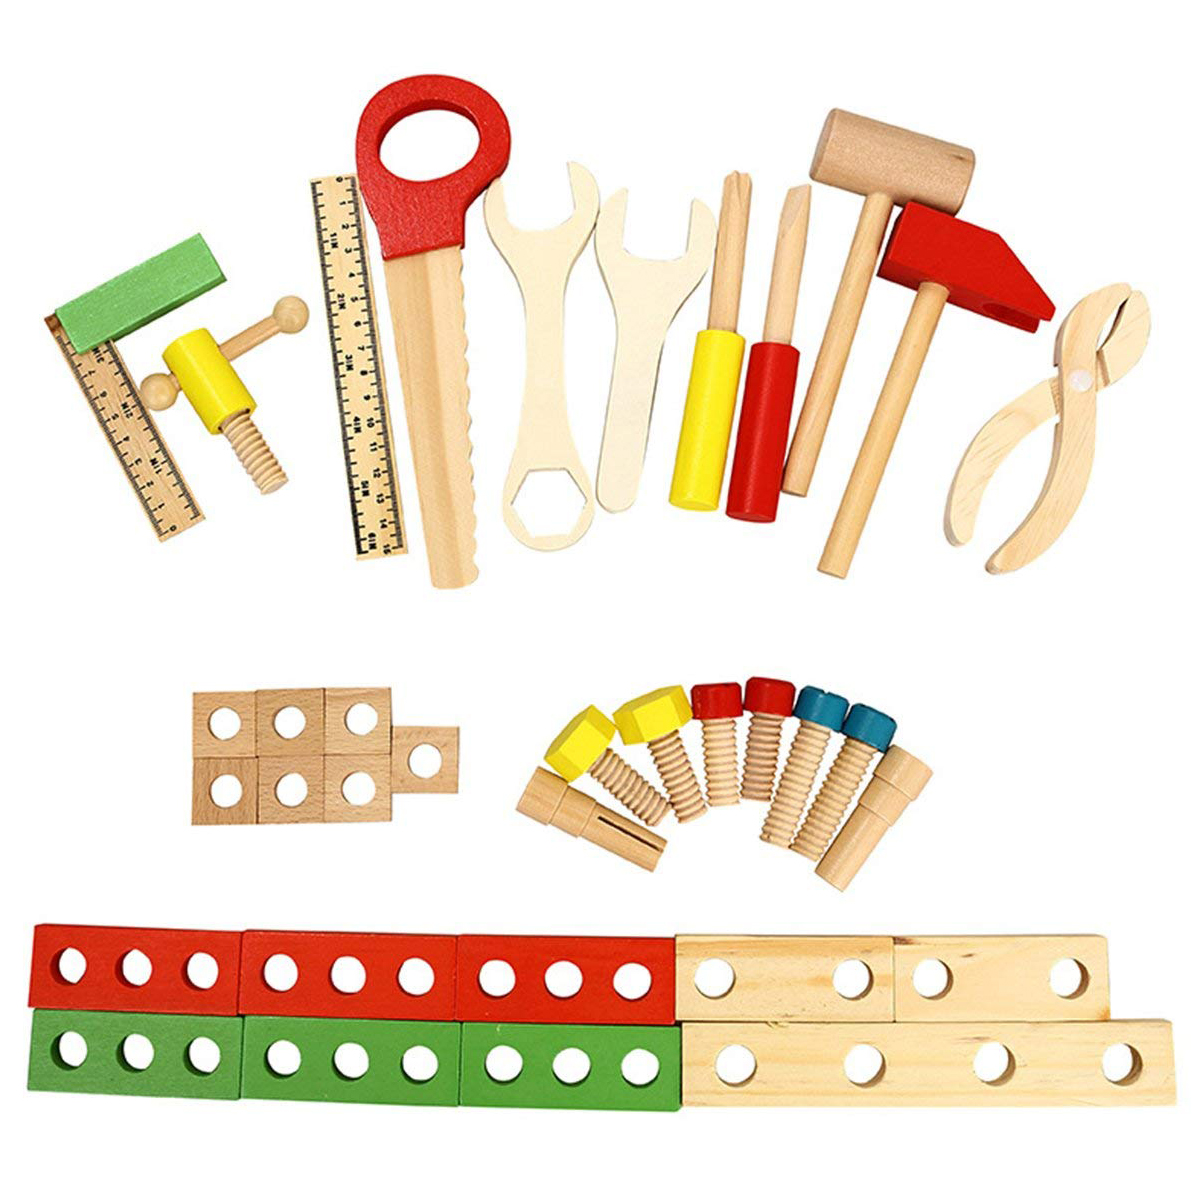 WOTT Wooden Tool Toys Pretend Play Tool box Accessories Set Educational Construction Toys Kids